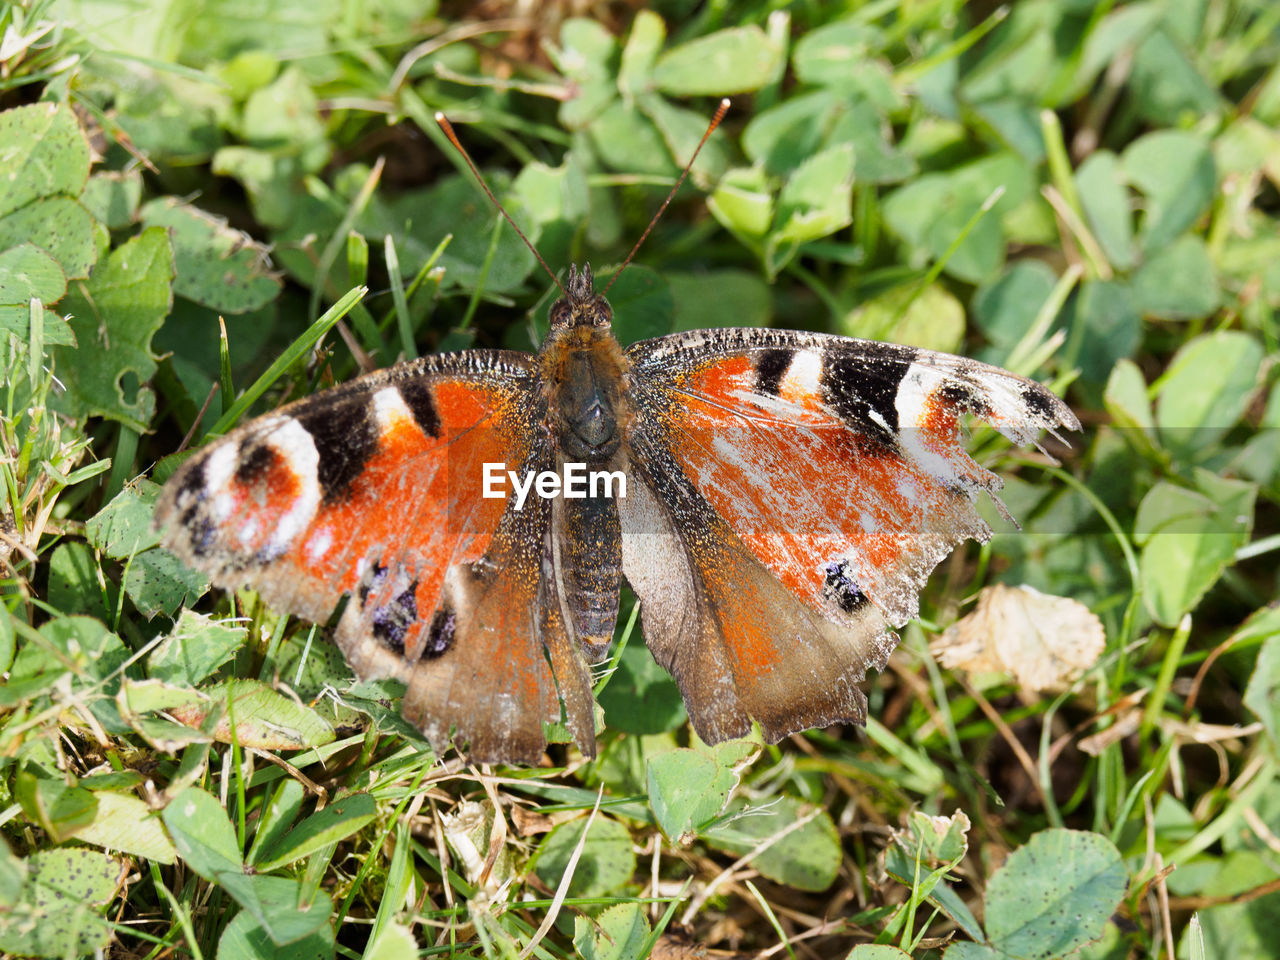 CLOSE-UP OF BUTTERFLY ON GRASS